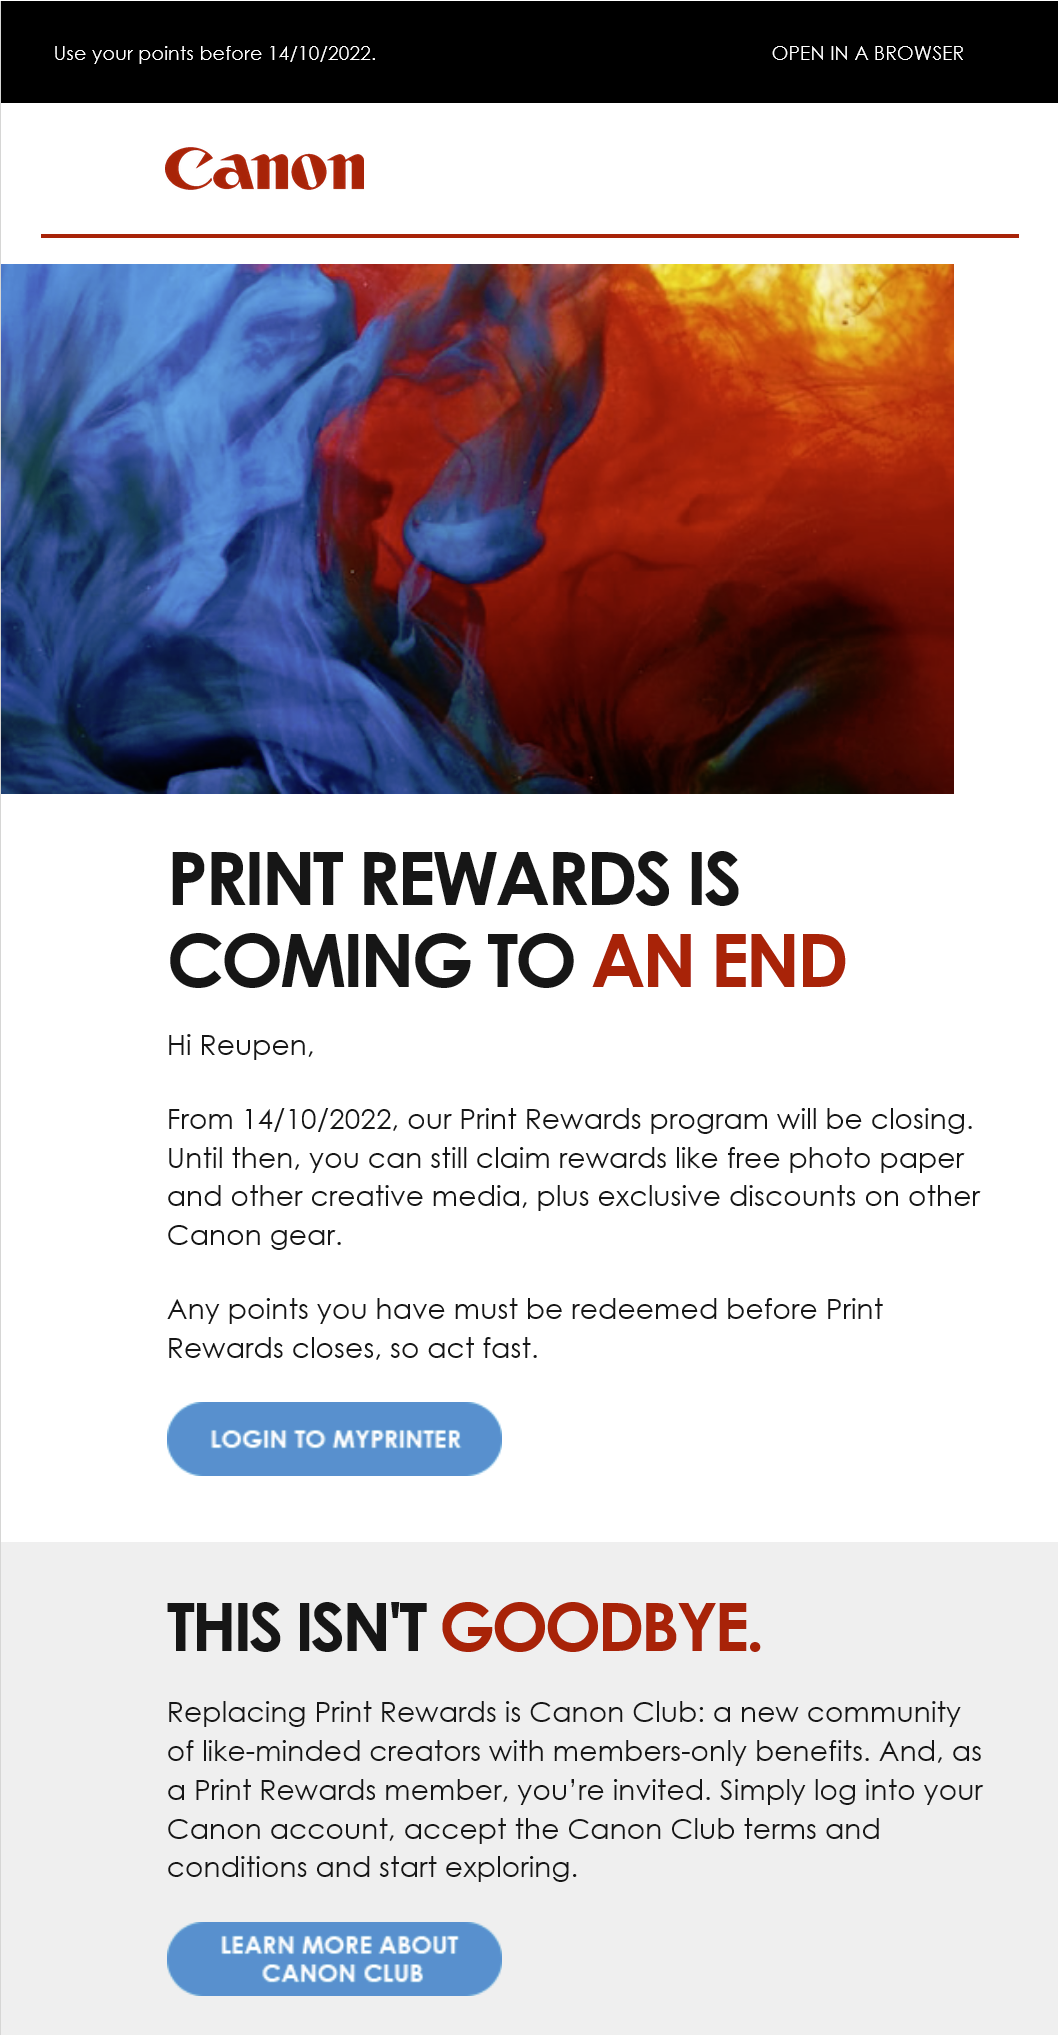 PRINT REWARDS IS COMING TO AN END. Hi Reupen, From 14/10/2022, our Print Rewards program will be closing. Until then, you can still claim rewards like free photo paper and other creative media, plus exclusive discounts on other Canon gear. Any points you have must be redeemed before Print Rewards closes, so act fast.